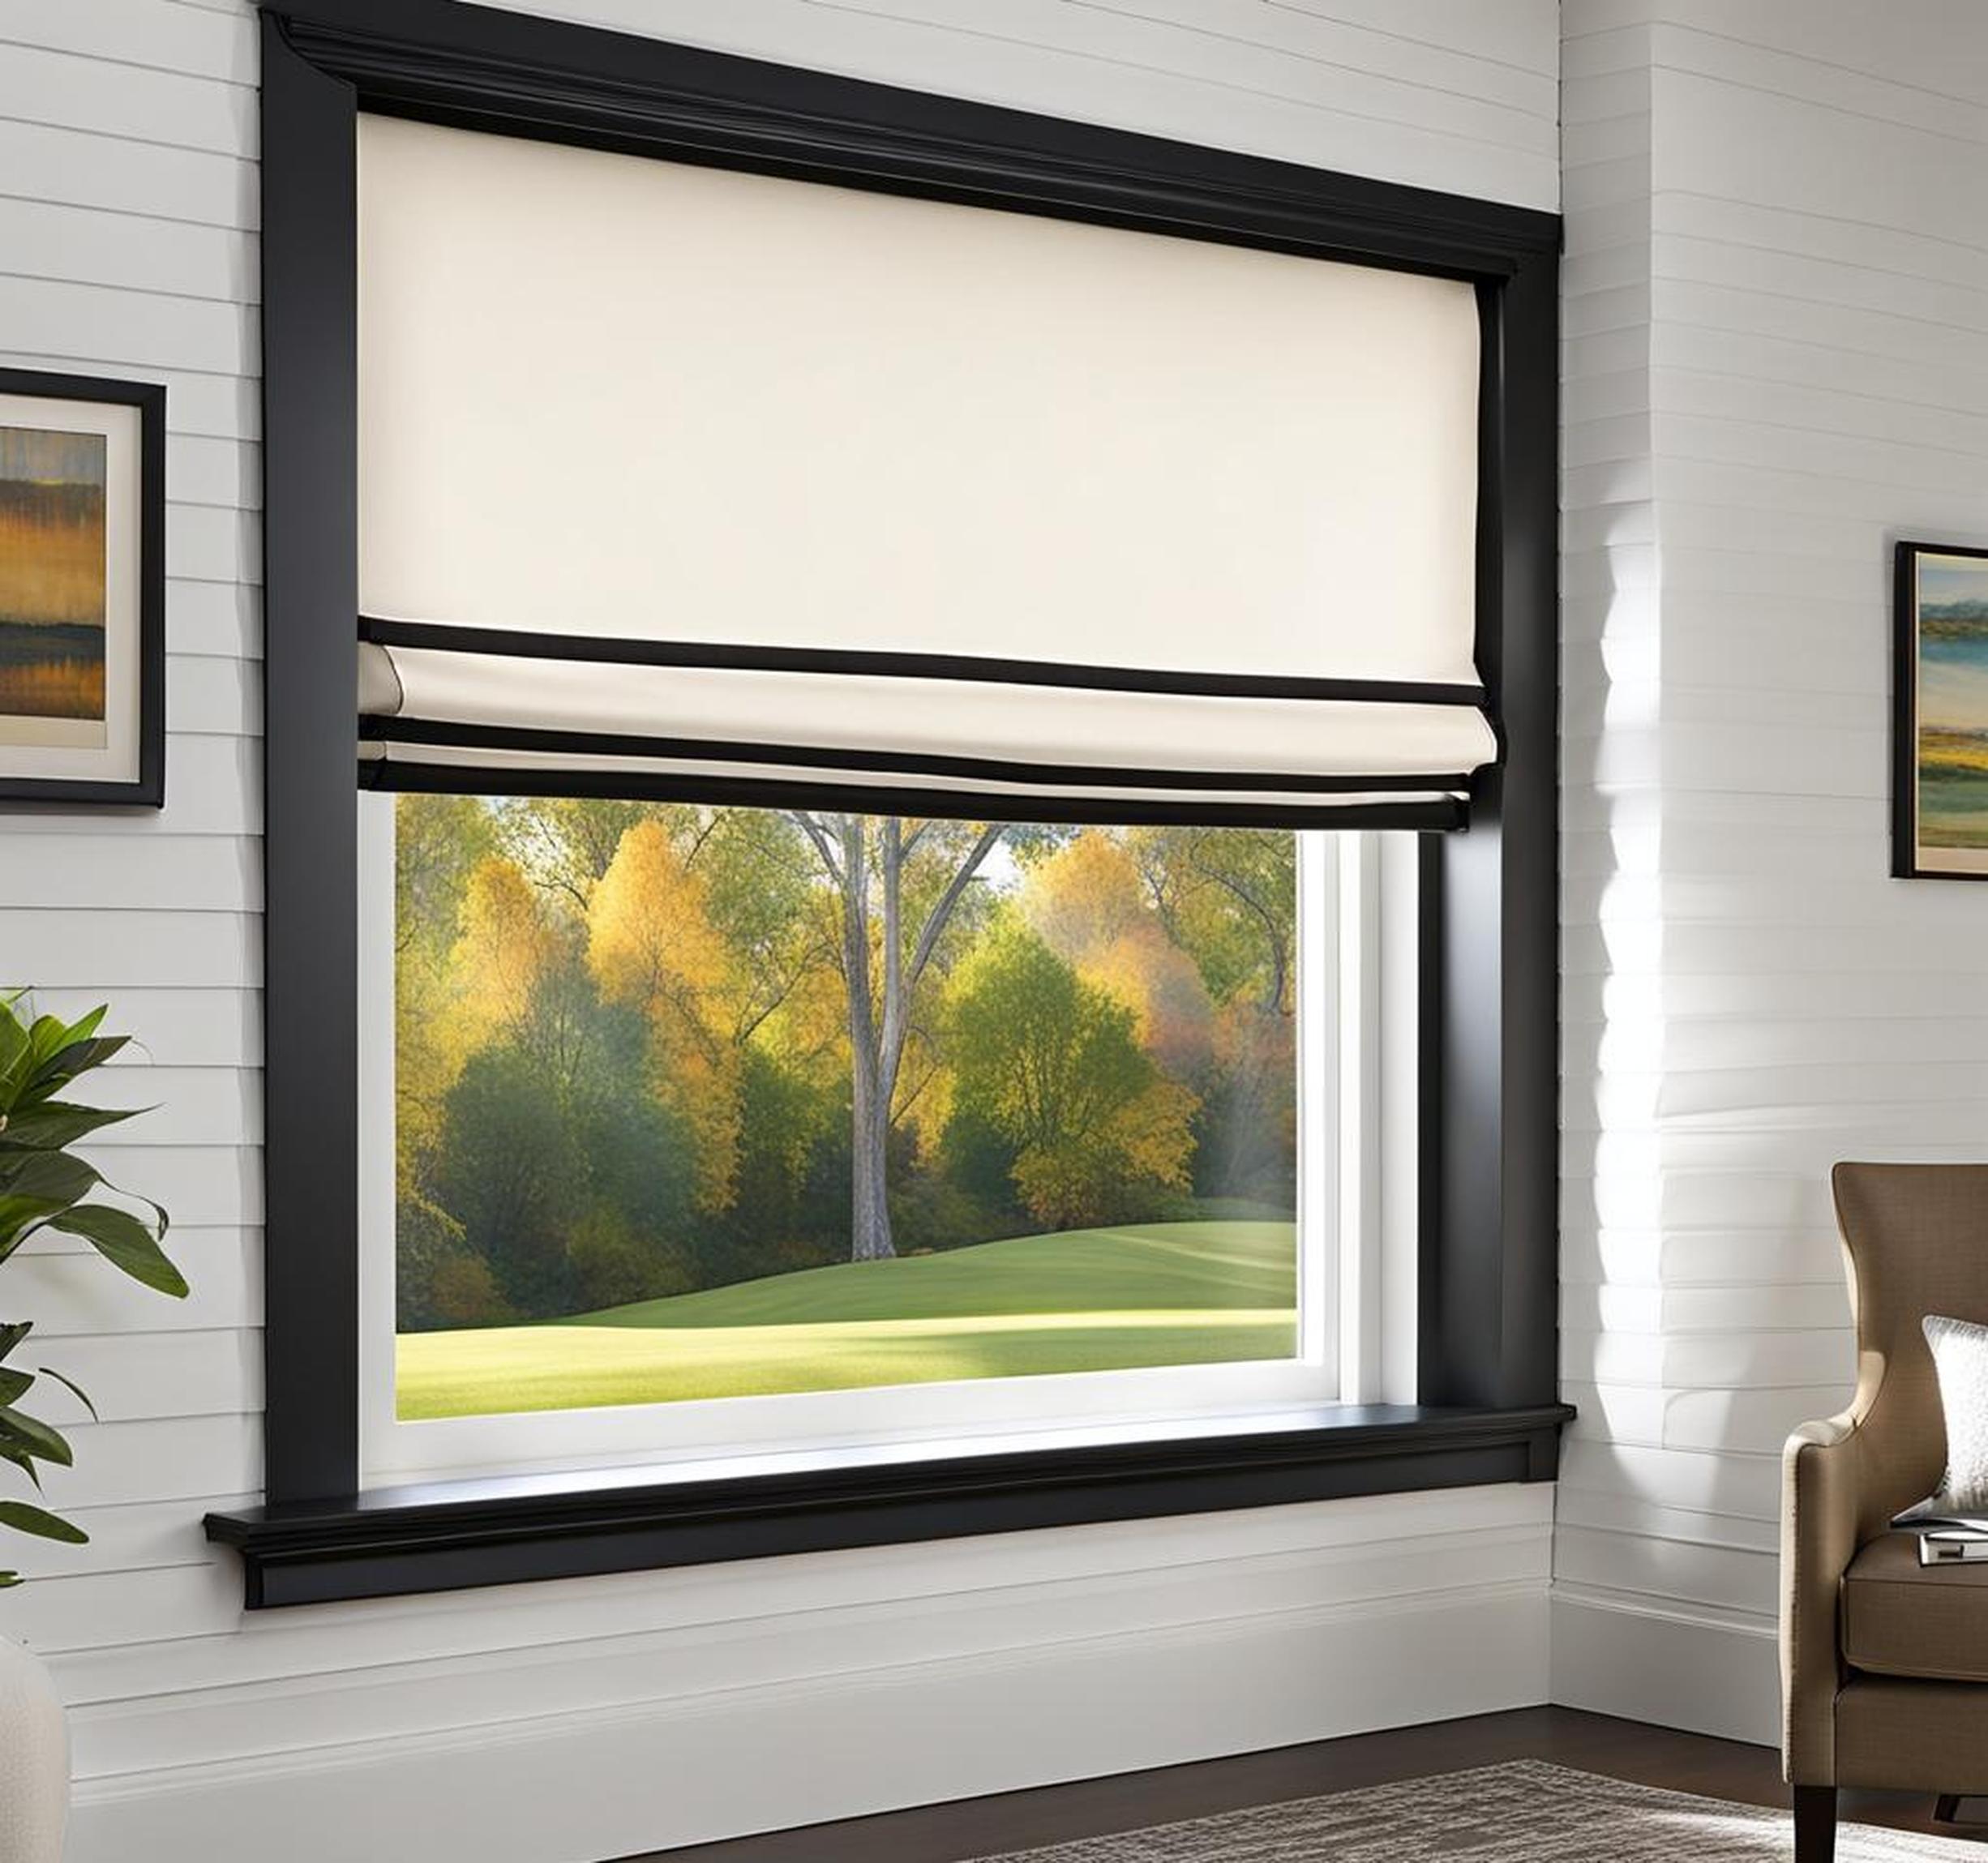 Customize White Roman Shades with Black Trim for Any Window